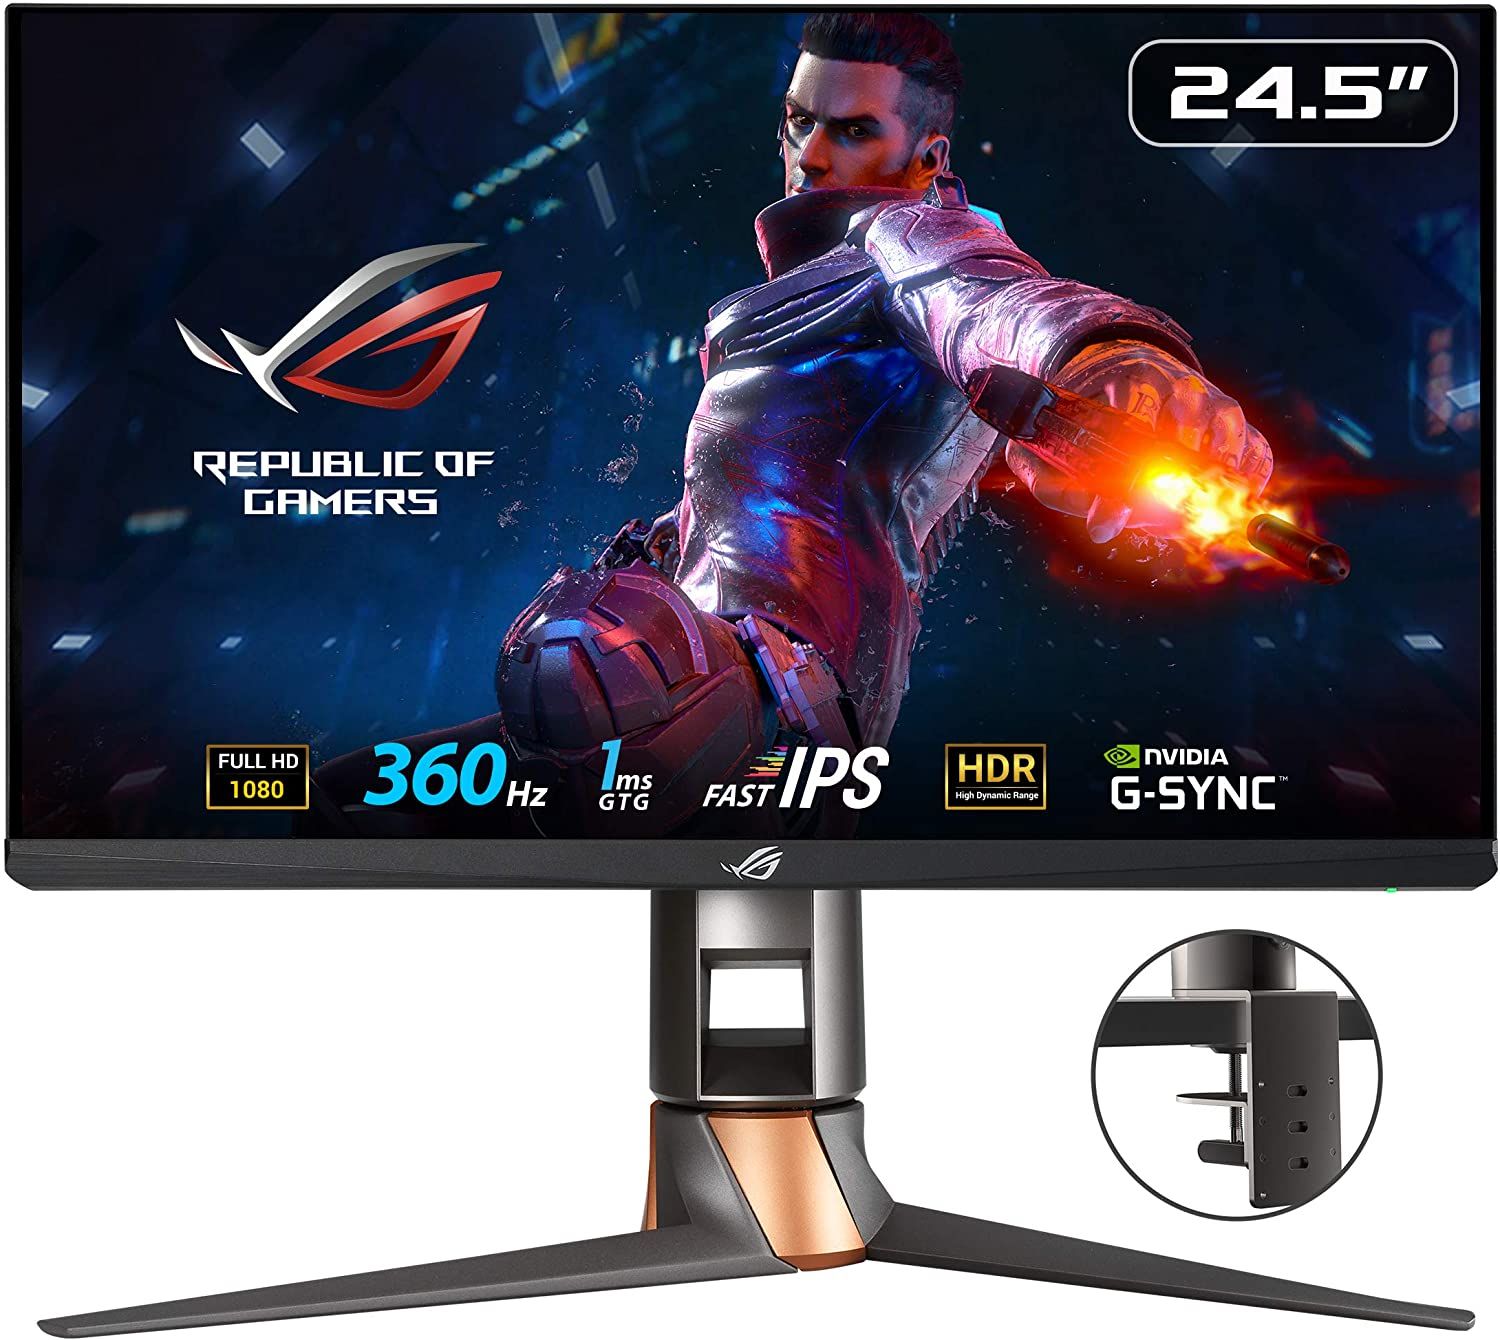 ASUS ROG Swift PG259QNR product image of a black monitor with bronze trim featuring a video game character with an orange-lit weapon in their hand on the display.